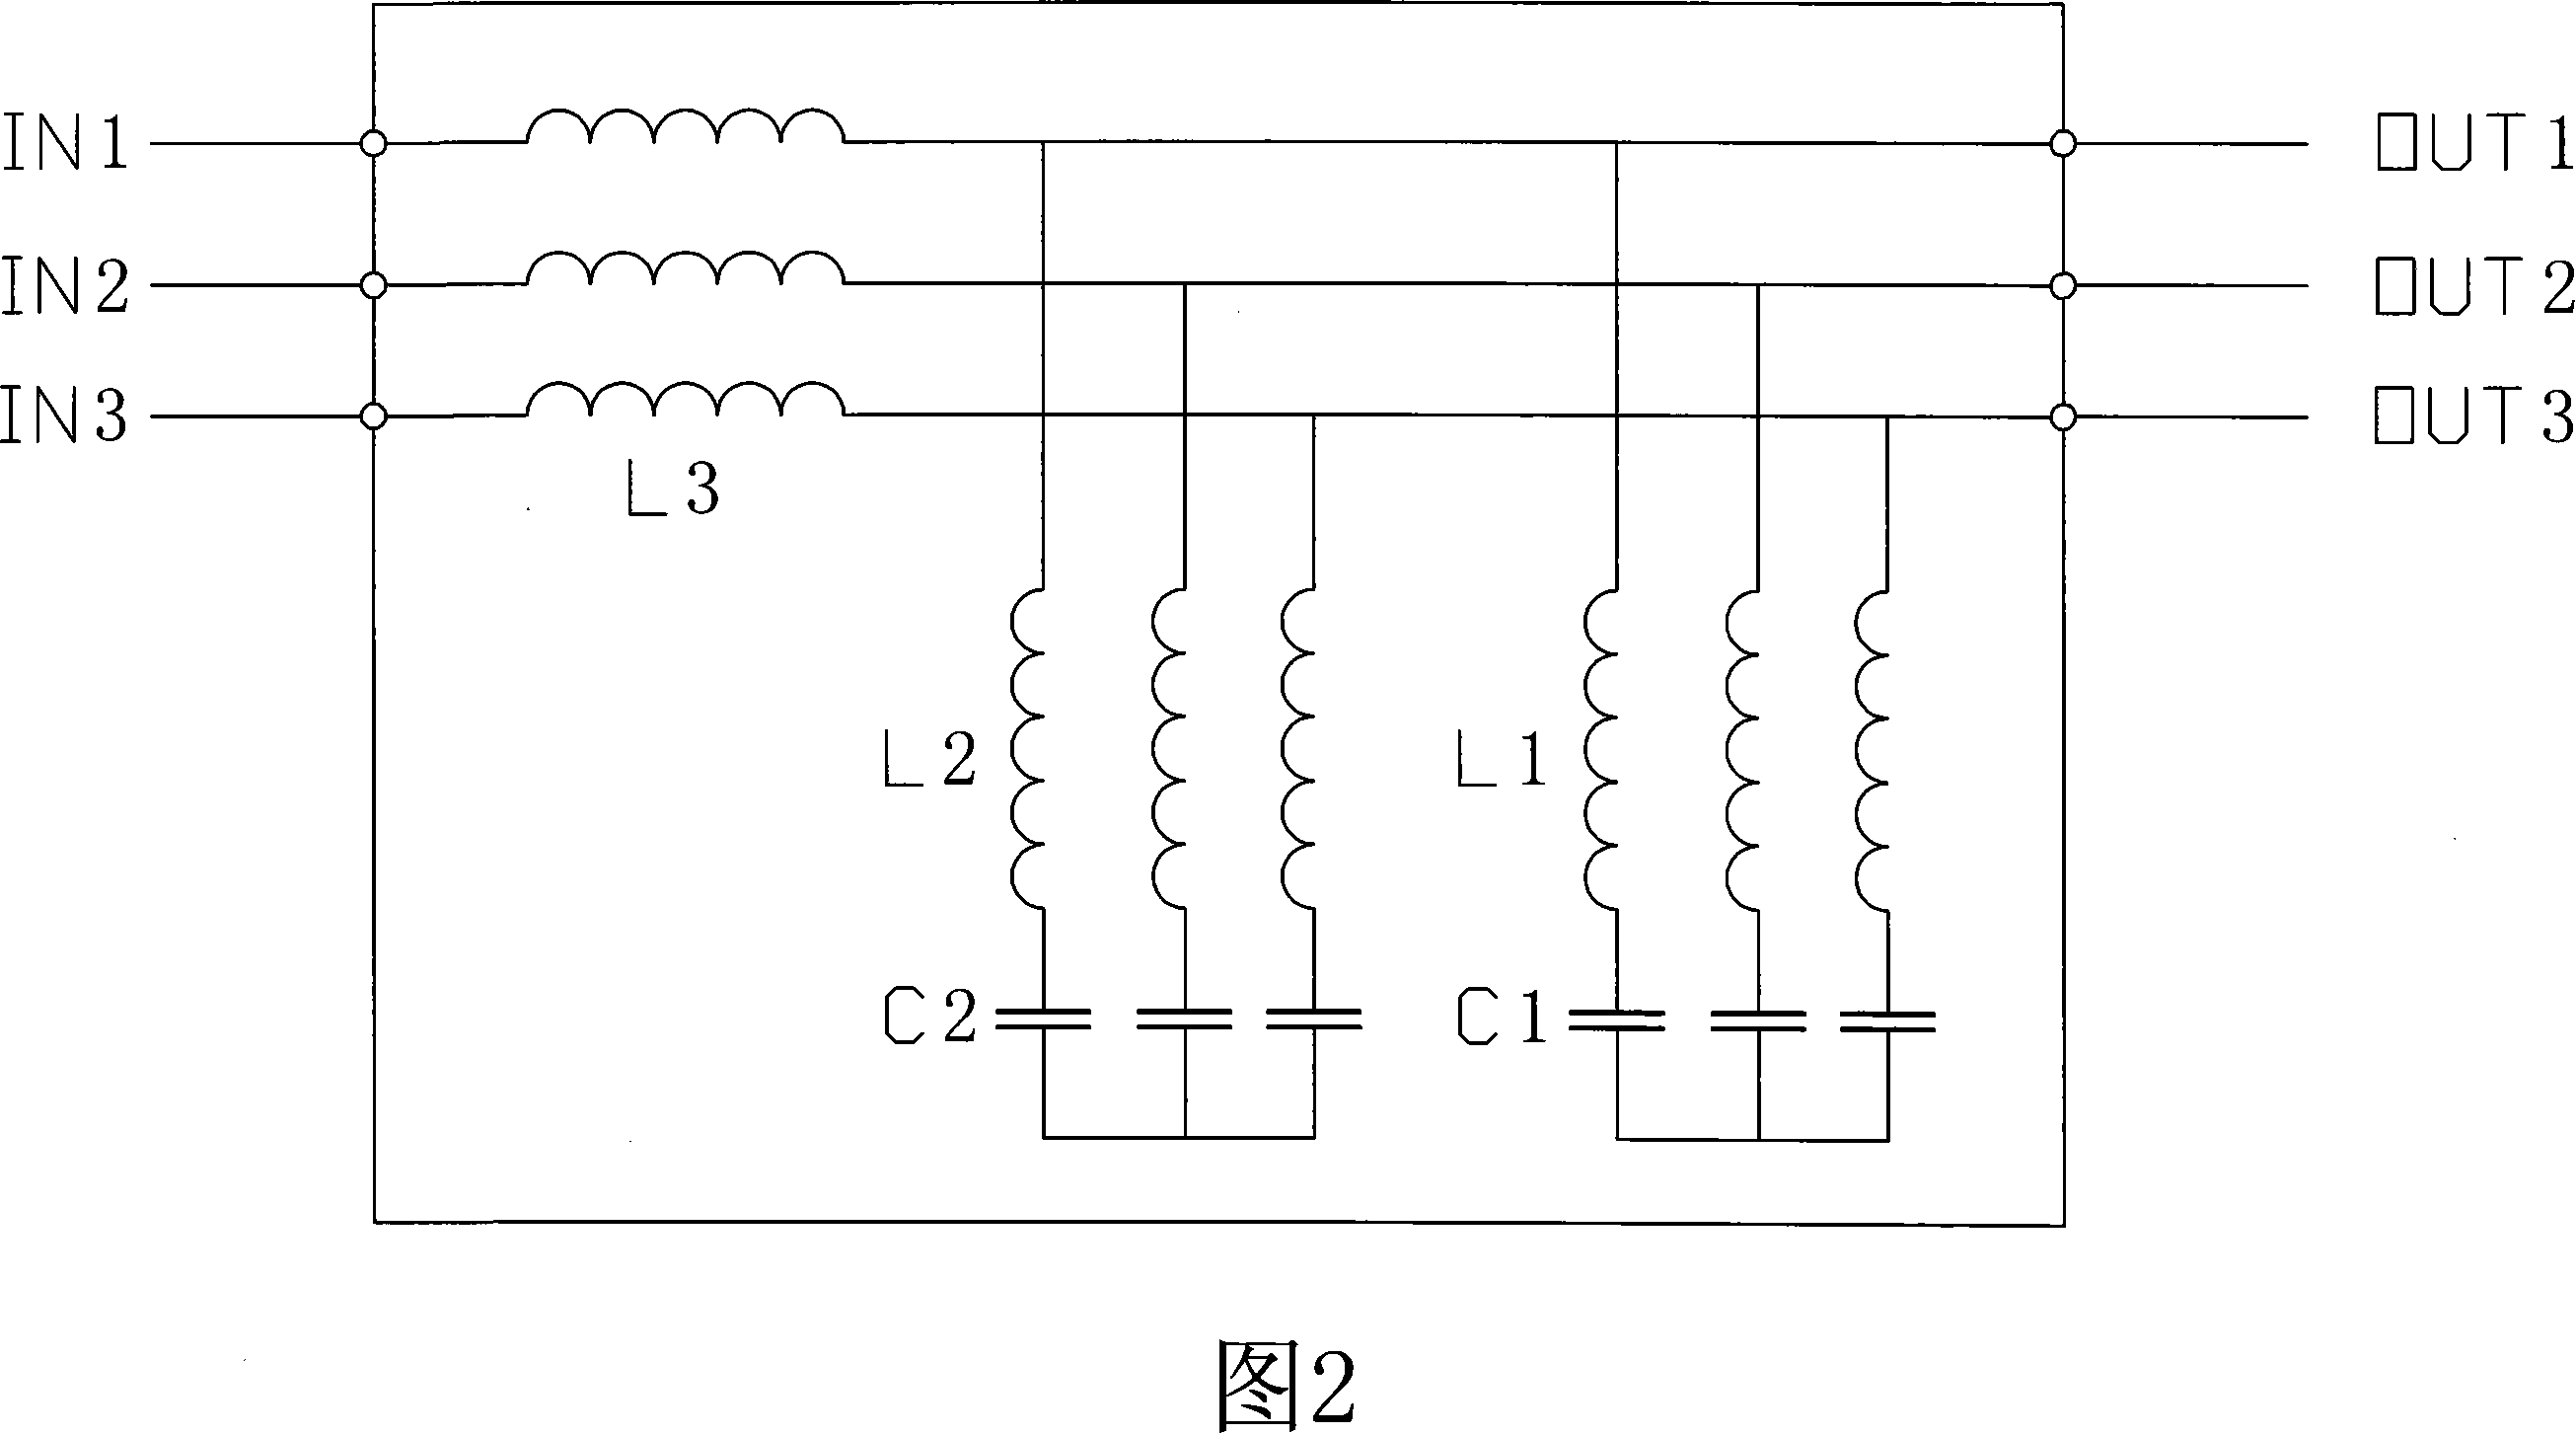 Common DC bus based multi-frequency converter system for vessel